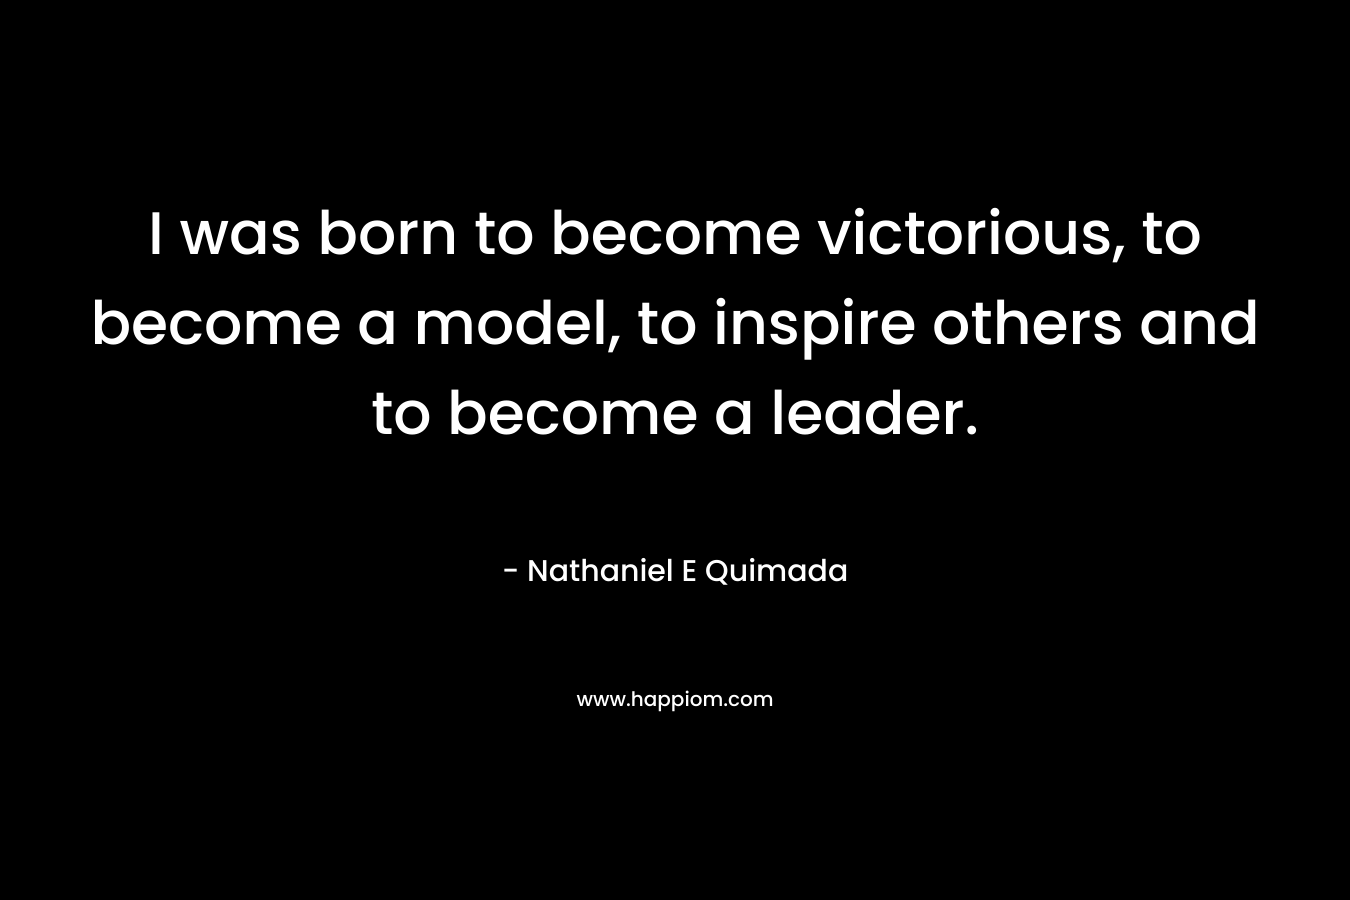 I was born to become victorious, to become a model, to inspire others and to become a leader. – Nathaniel E Quimada